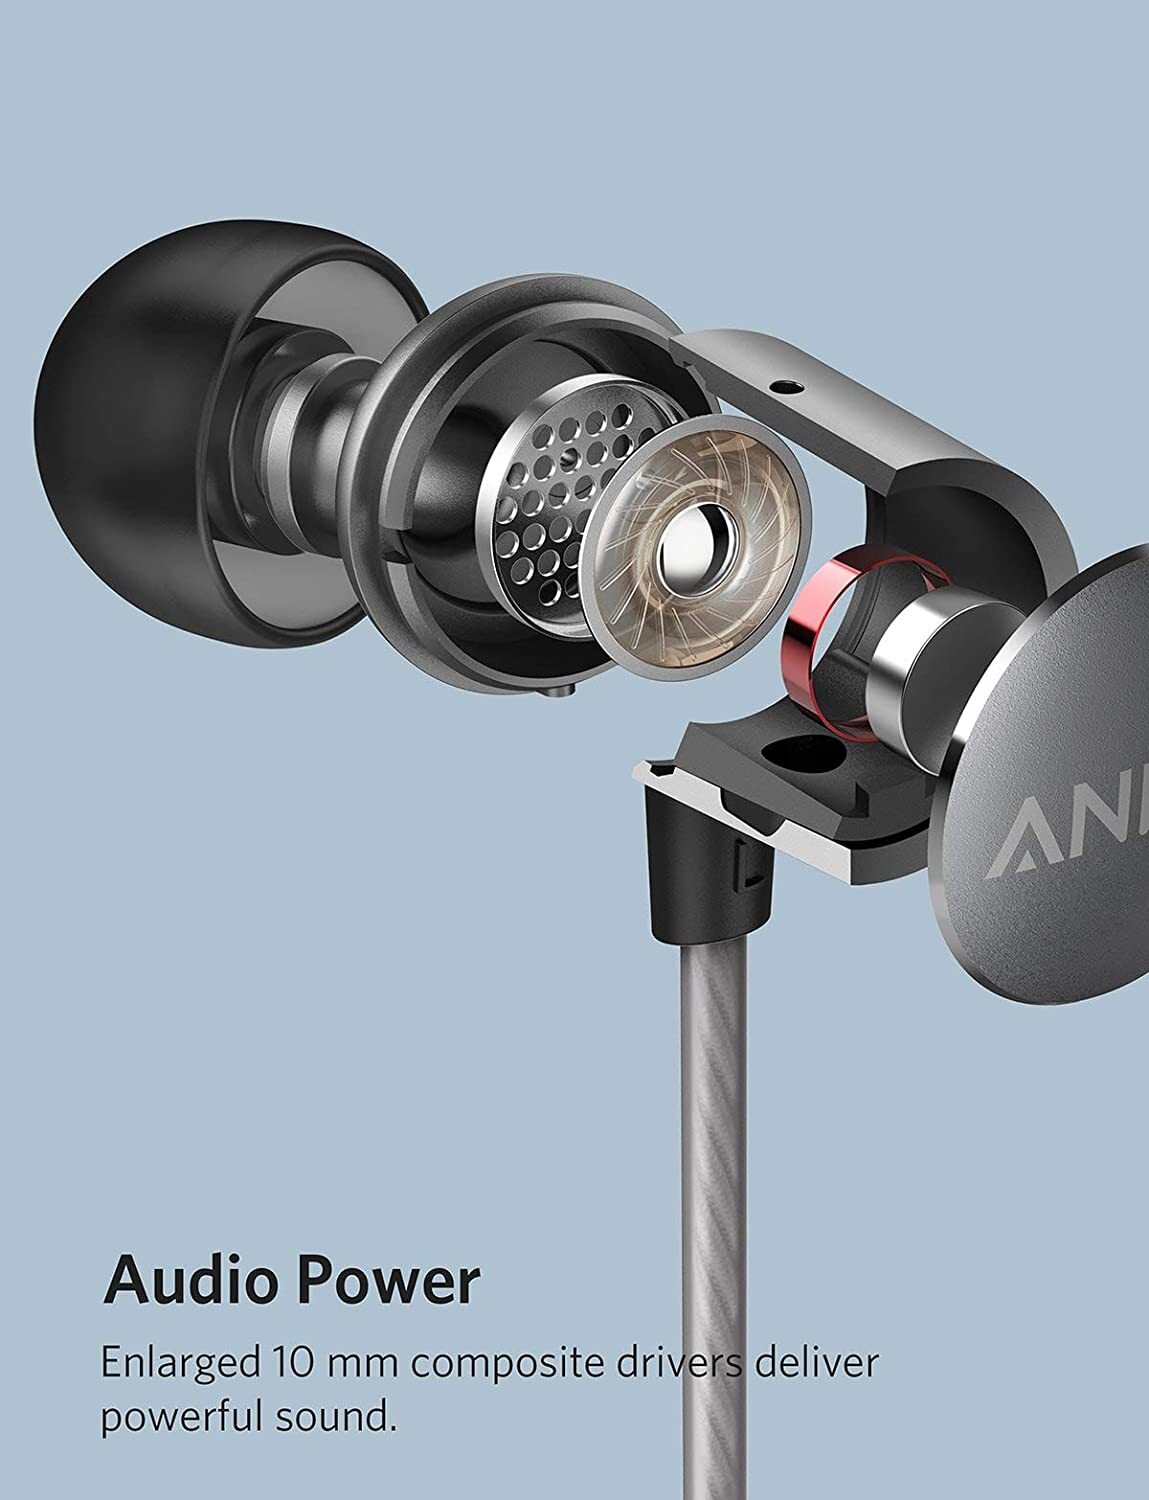 Anker Wired Soundbuds Verve with Built-in Microphone, in Ear Stereo Wired Headphones- Gray-M000000000467 www.mysocially.com